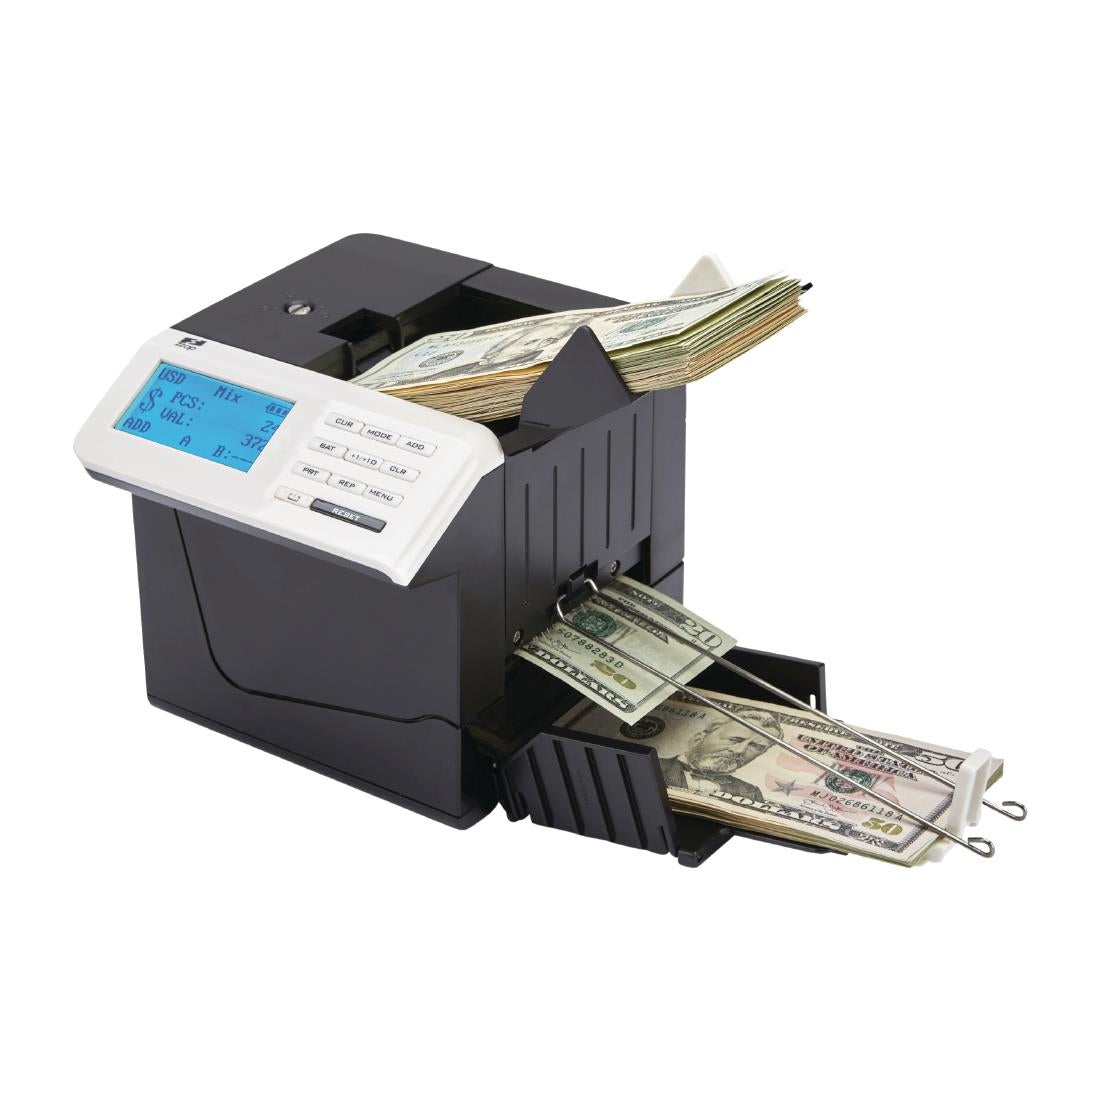 ZZap D50i Banknote Counter 250notes/min - 8 currencies